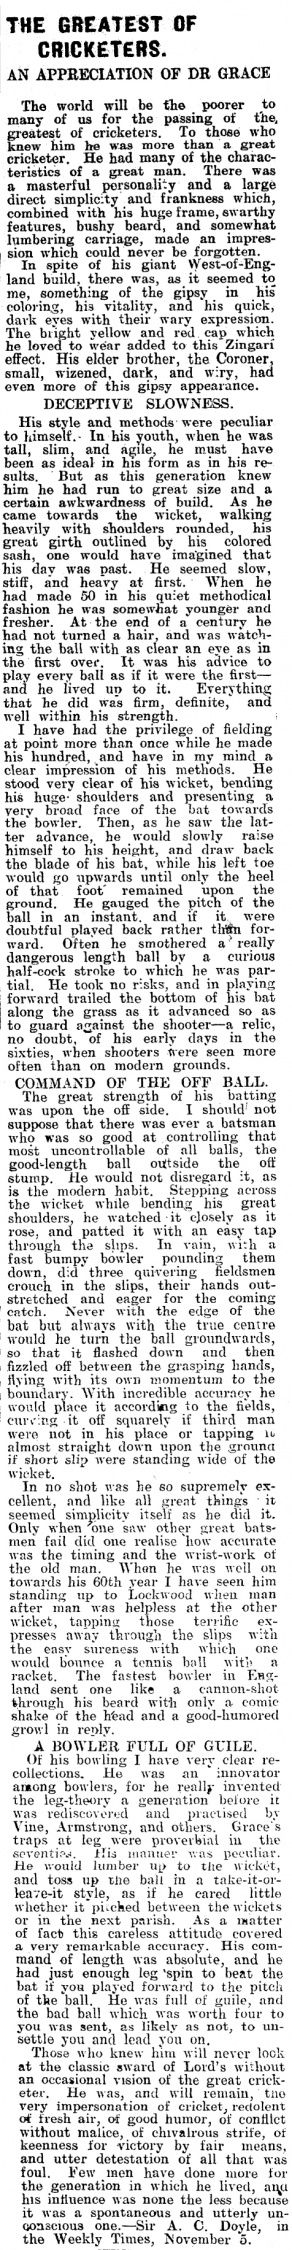 Hawera & Normanby Star (4 august 1915)